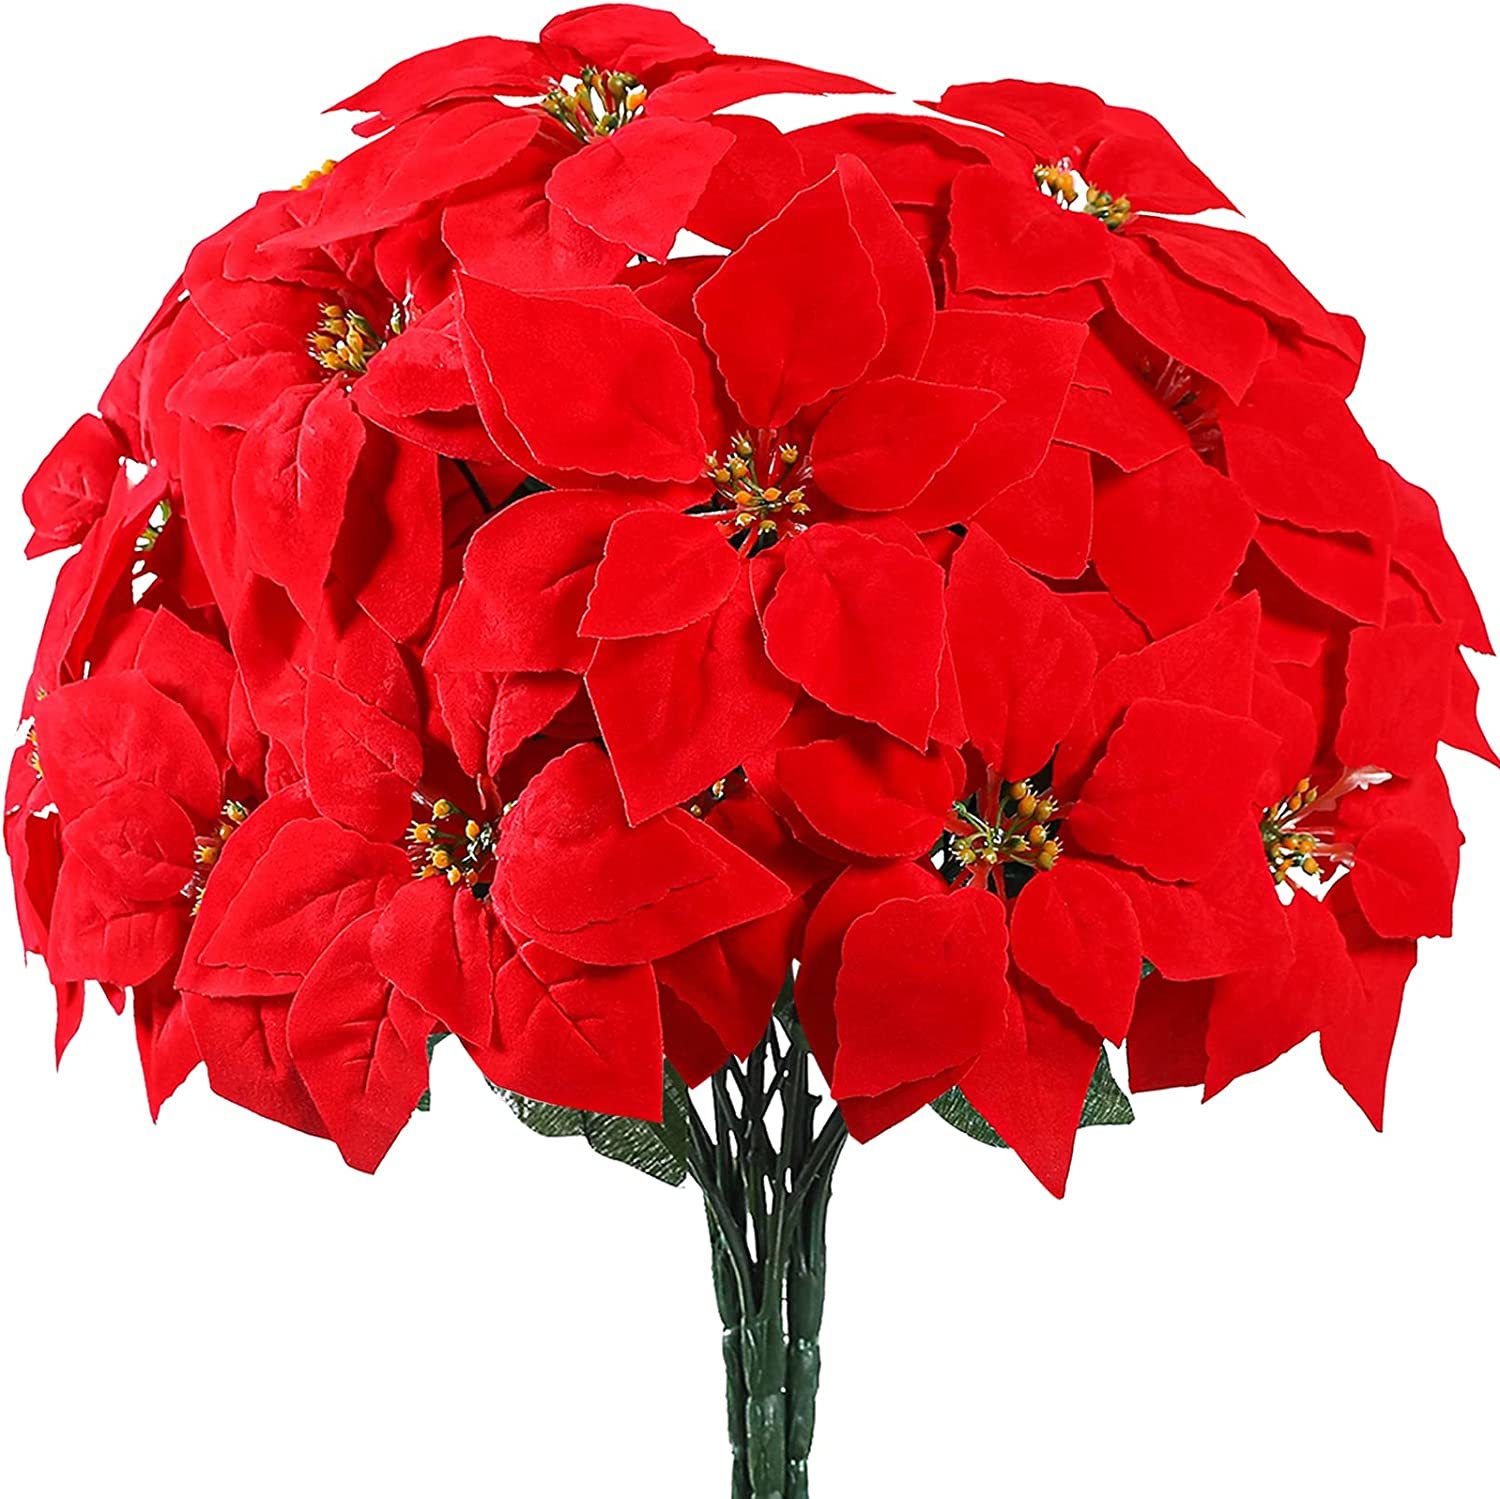 Hawesome 2 Pcs Artificial Poinsettia Flowers Christmas Flowers 7 Heads Silk - $41.99